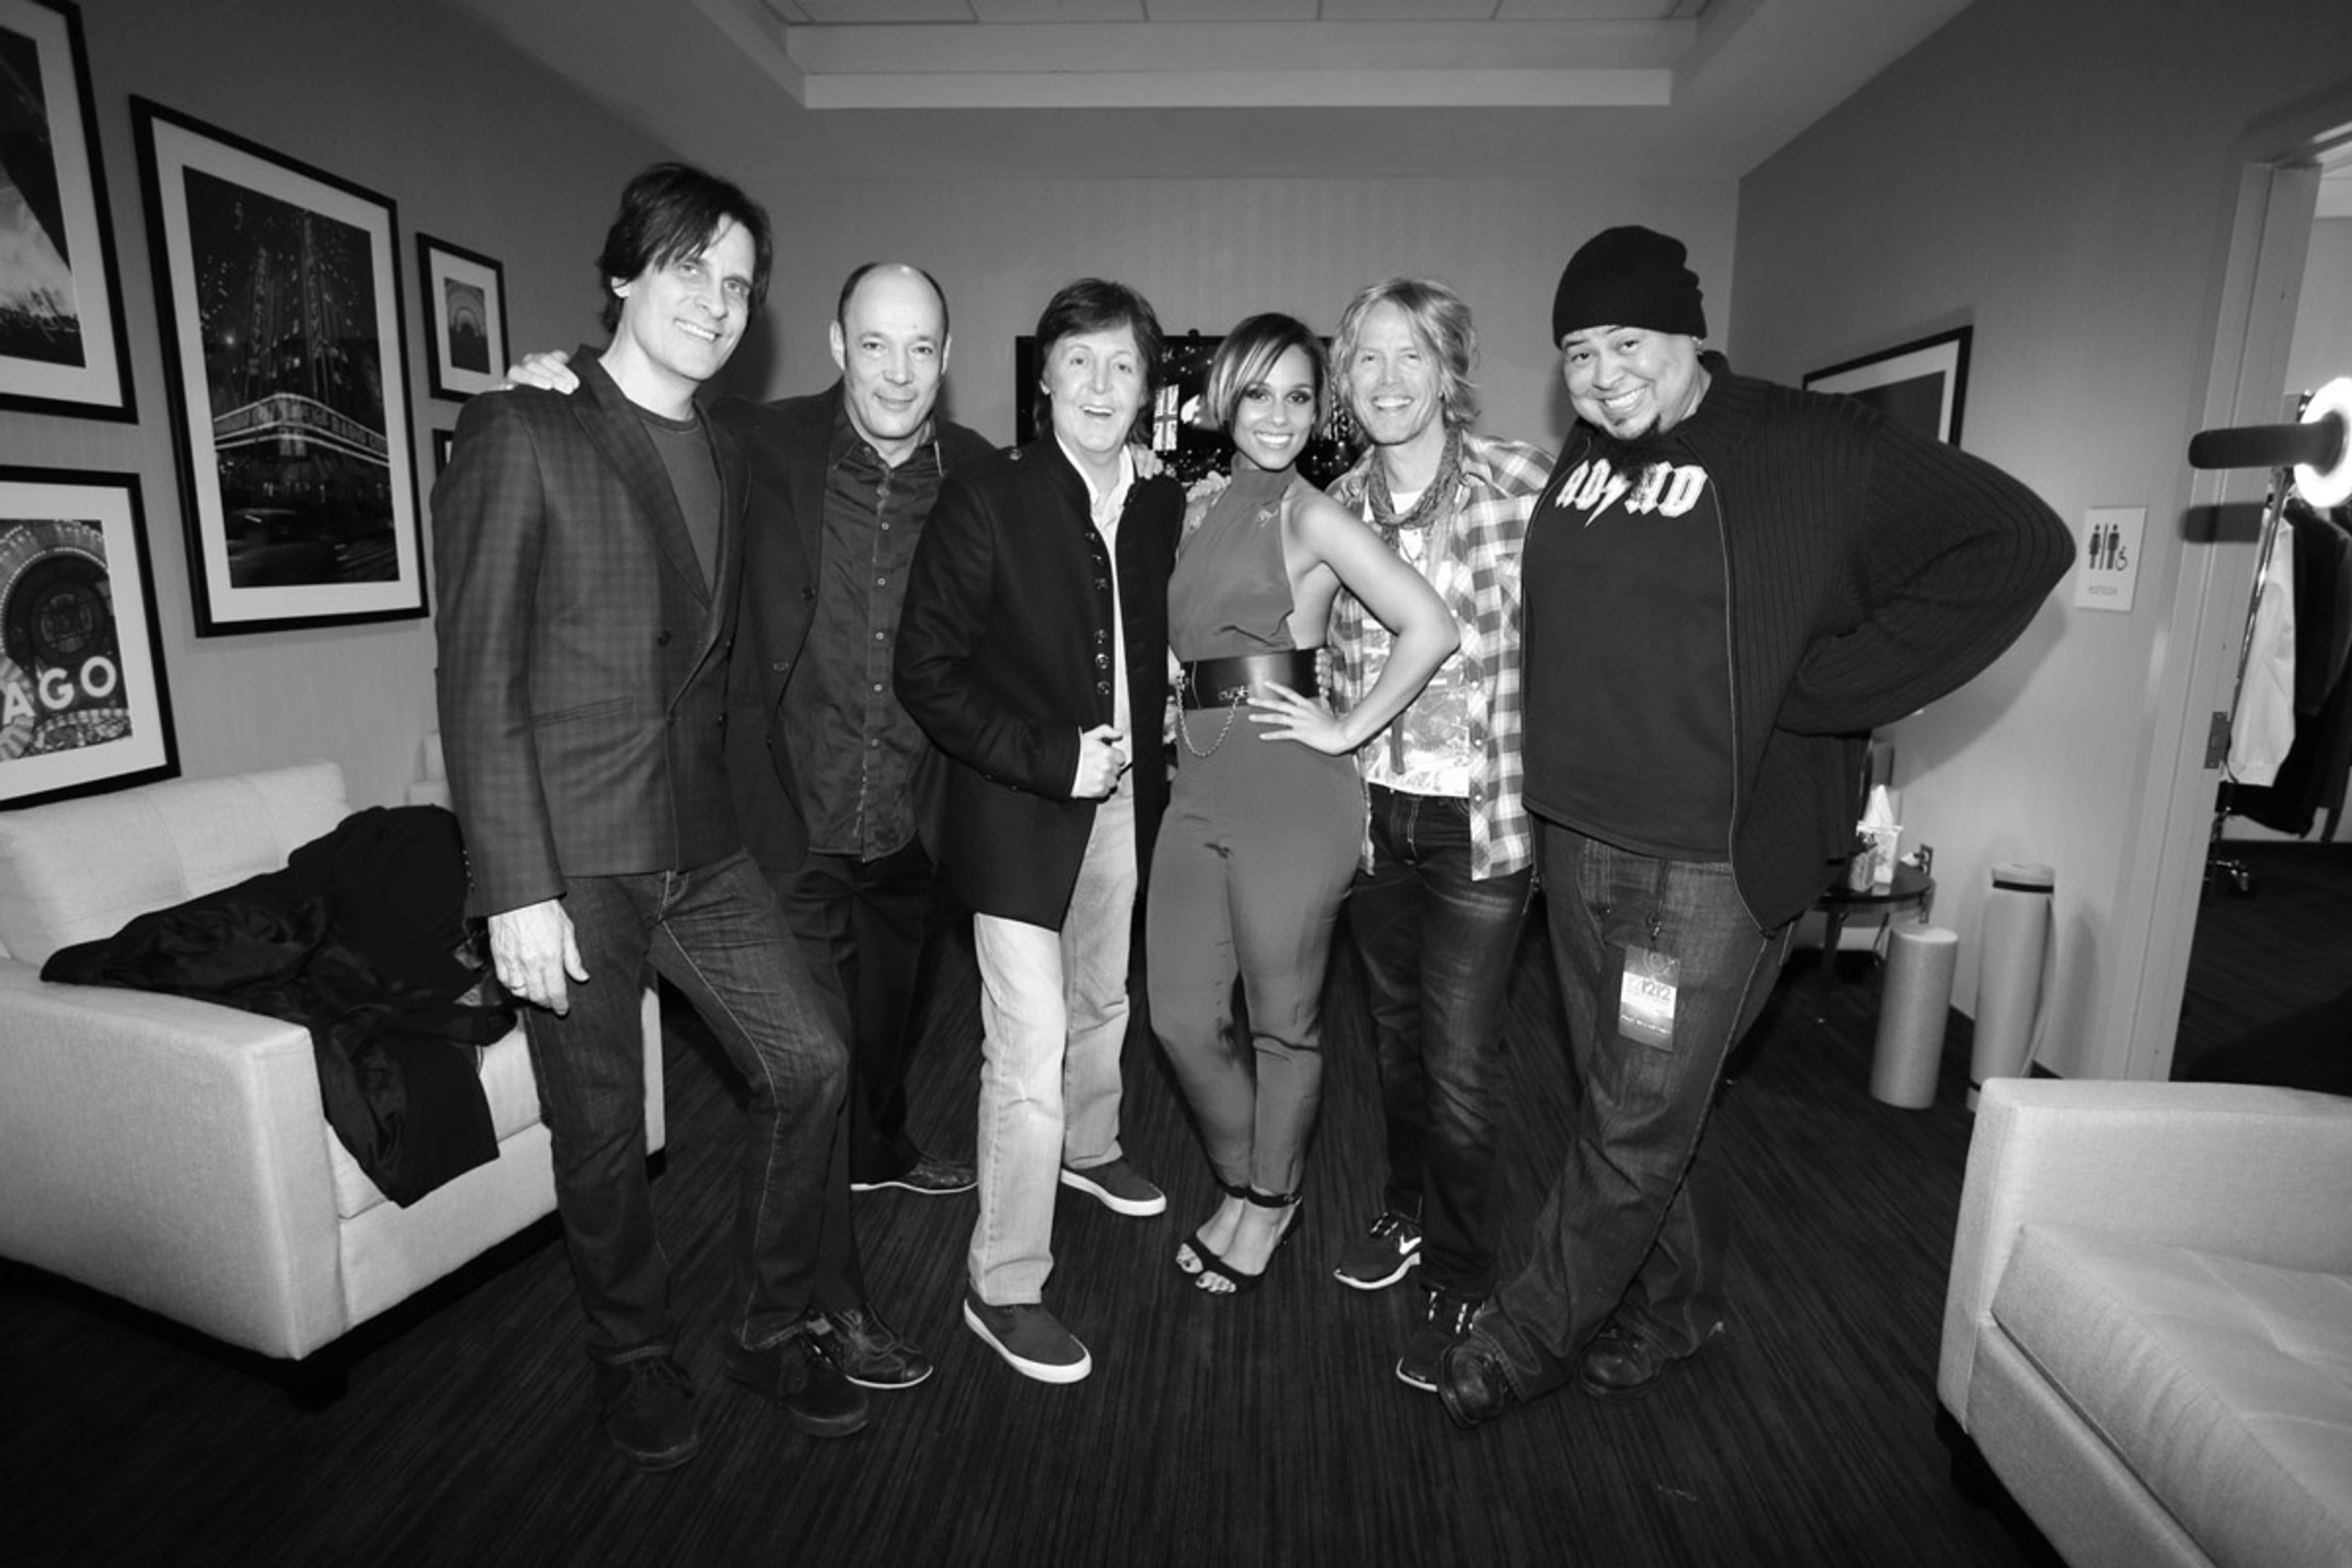 Rusty, Wix, Paul, Alicia Keys, Brian and Abe backstage, 12-12-12 Hurricane Sandy Benefit, Madison Square Garden, NYC, 12th December 2012